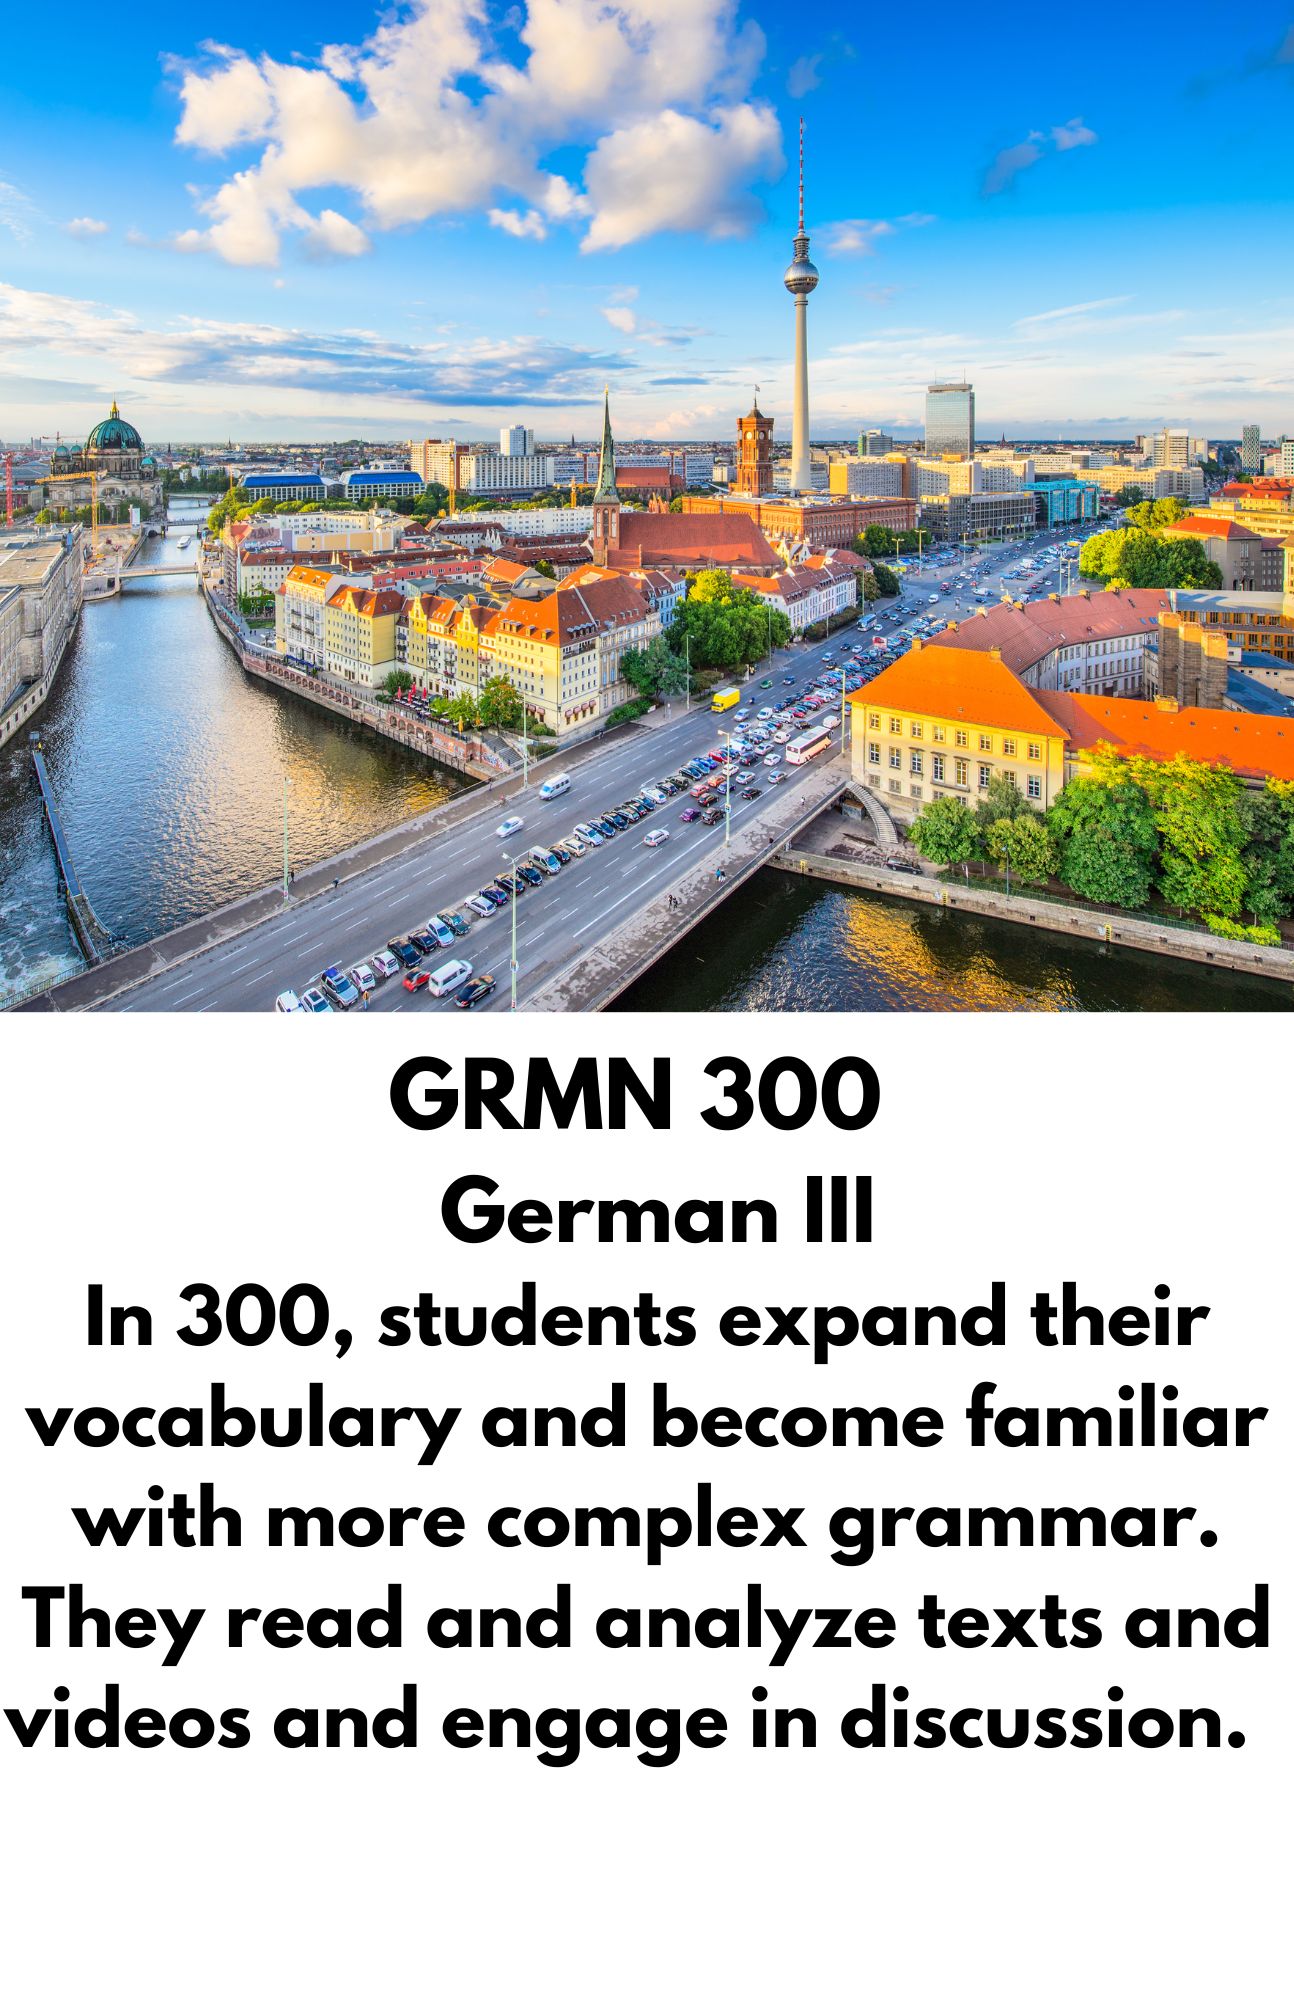 GRMN 301-  German IV. In 301, students read, interpret, and discuss longer German texts, extending the focus on language and culture. Students research various aspects of the history and culture of German-speaking countries and learn to write about and present the results of their research.